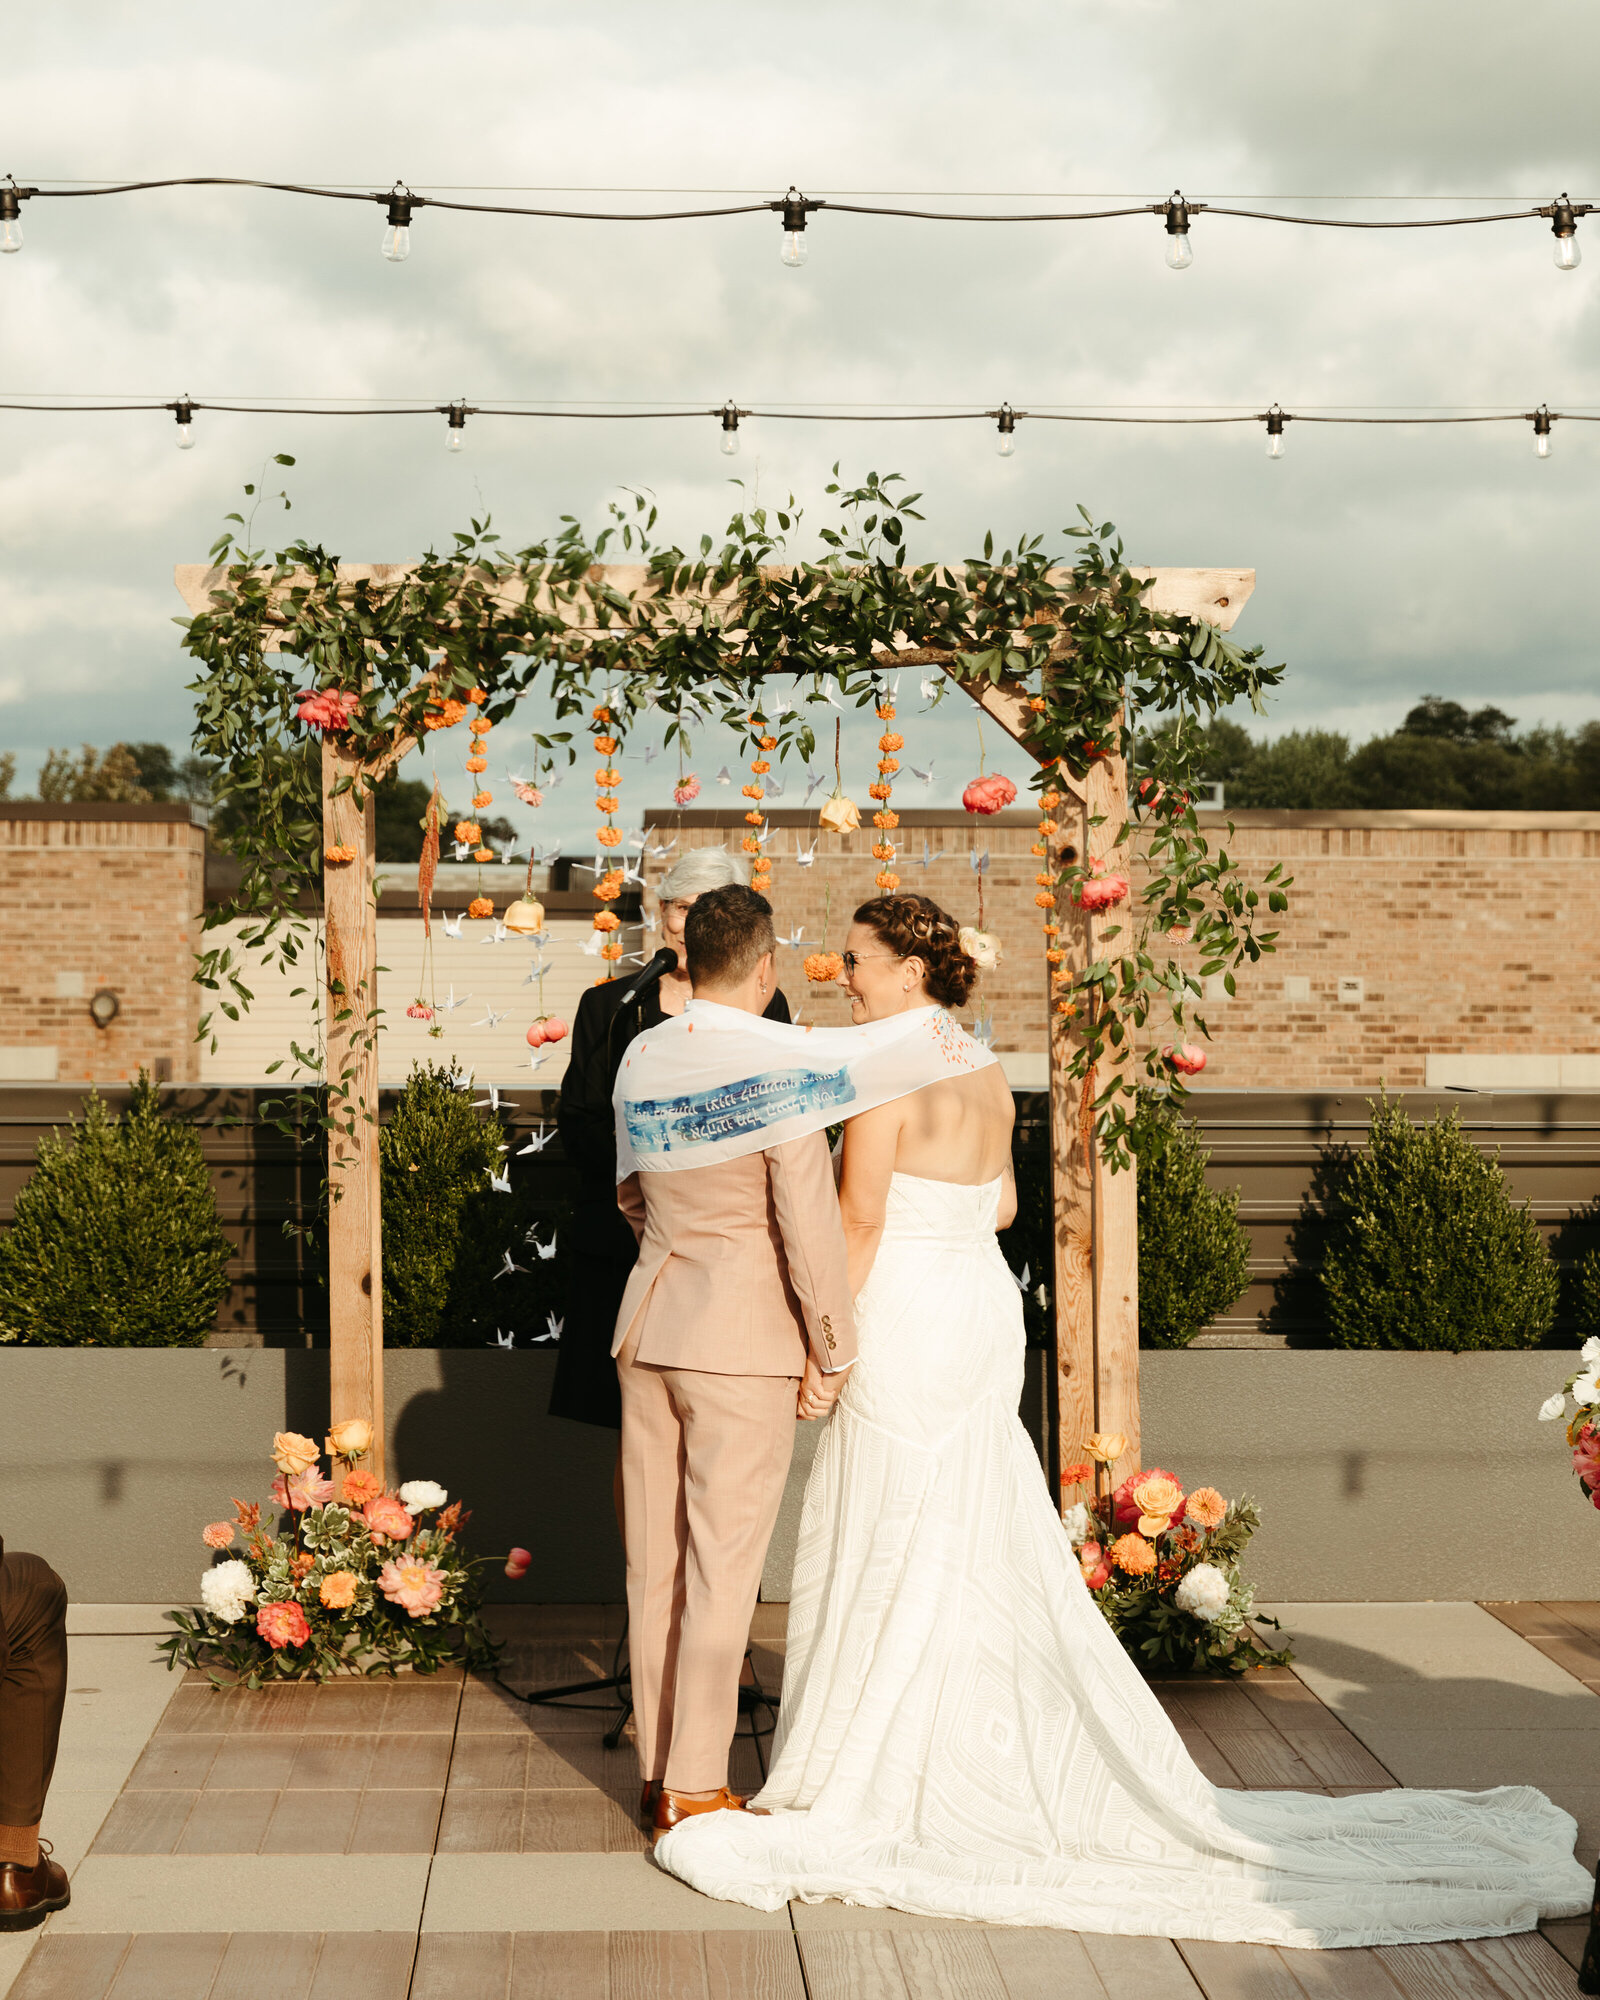 Brides standing at alter of flowers on a rooftop